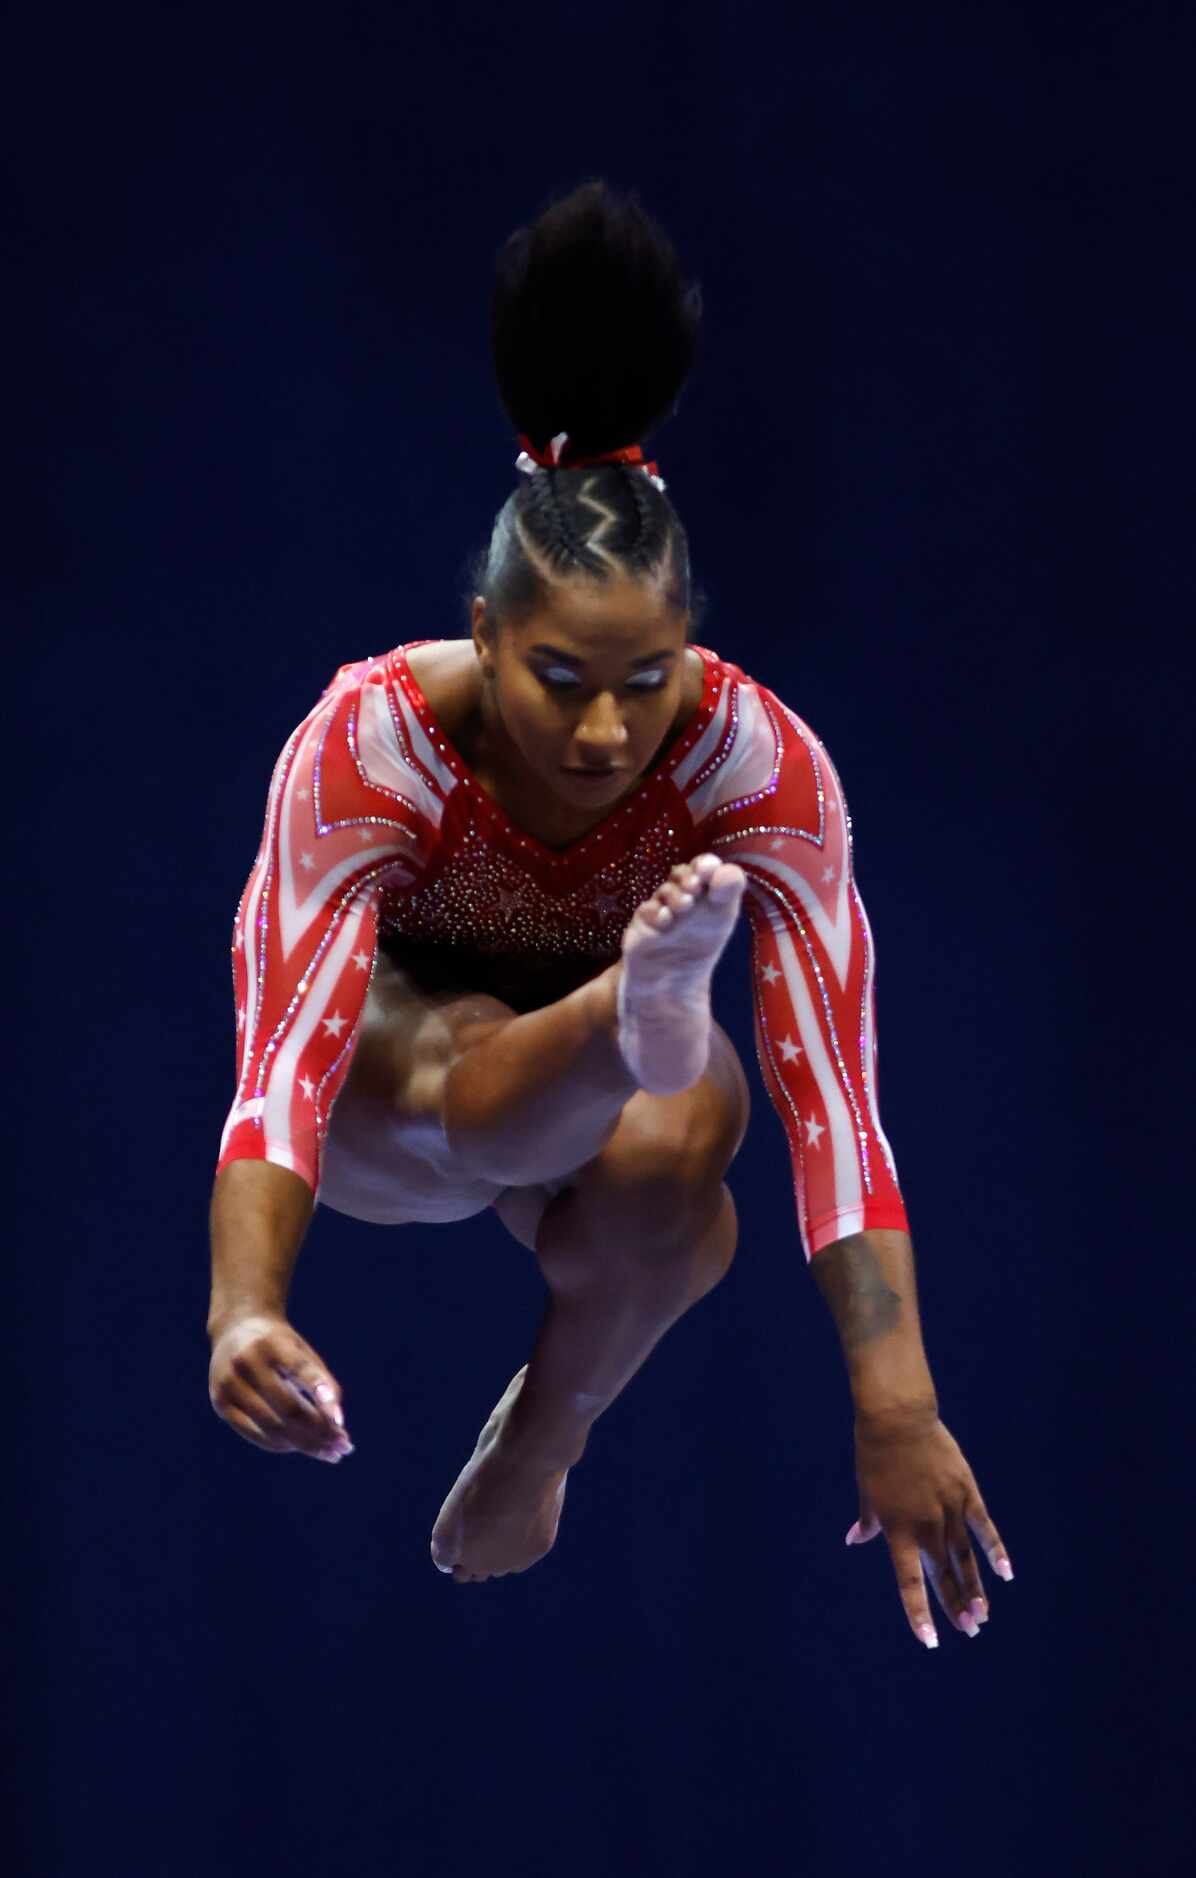 Jordan Chiles competes on the balance beam during day 2 of the women's 2021 U.S. Olympic...